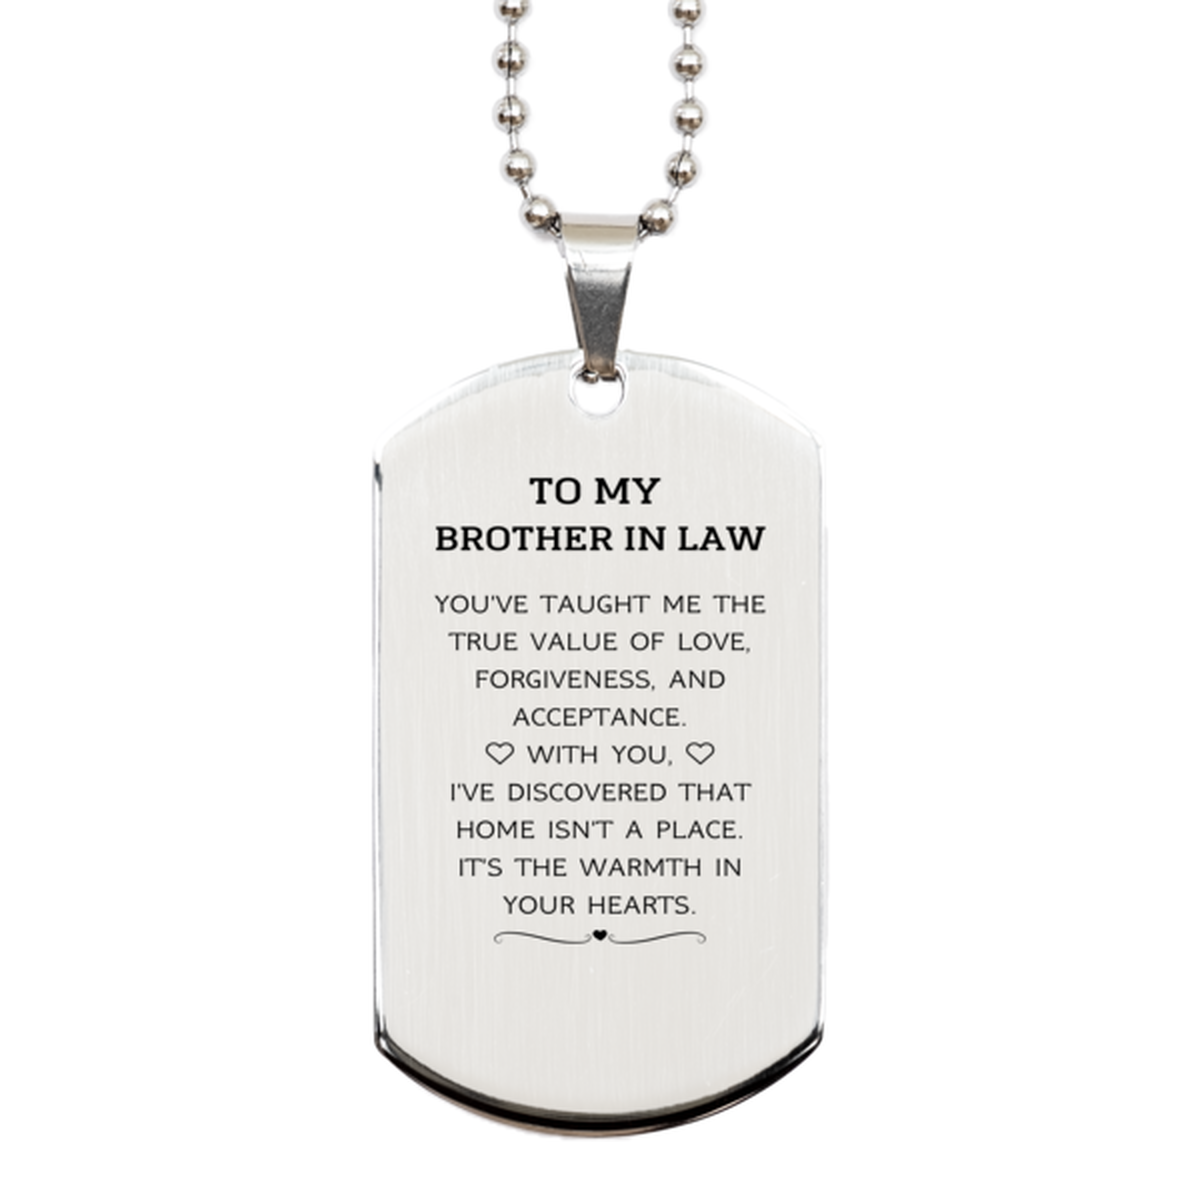 To My Brother In Law Gifts, You've taught me the true value of love, Thank You Gifts For Brother In Law, Birthday Silver Dog Tag For Brother In Law